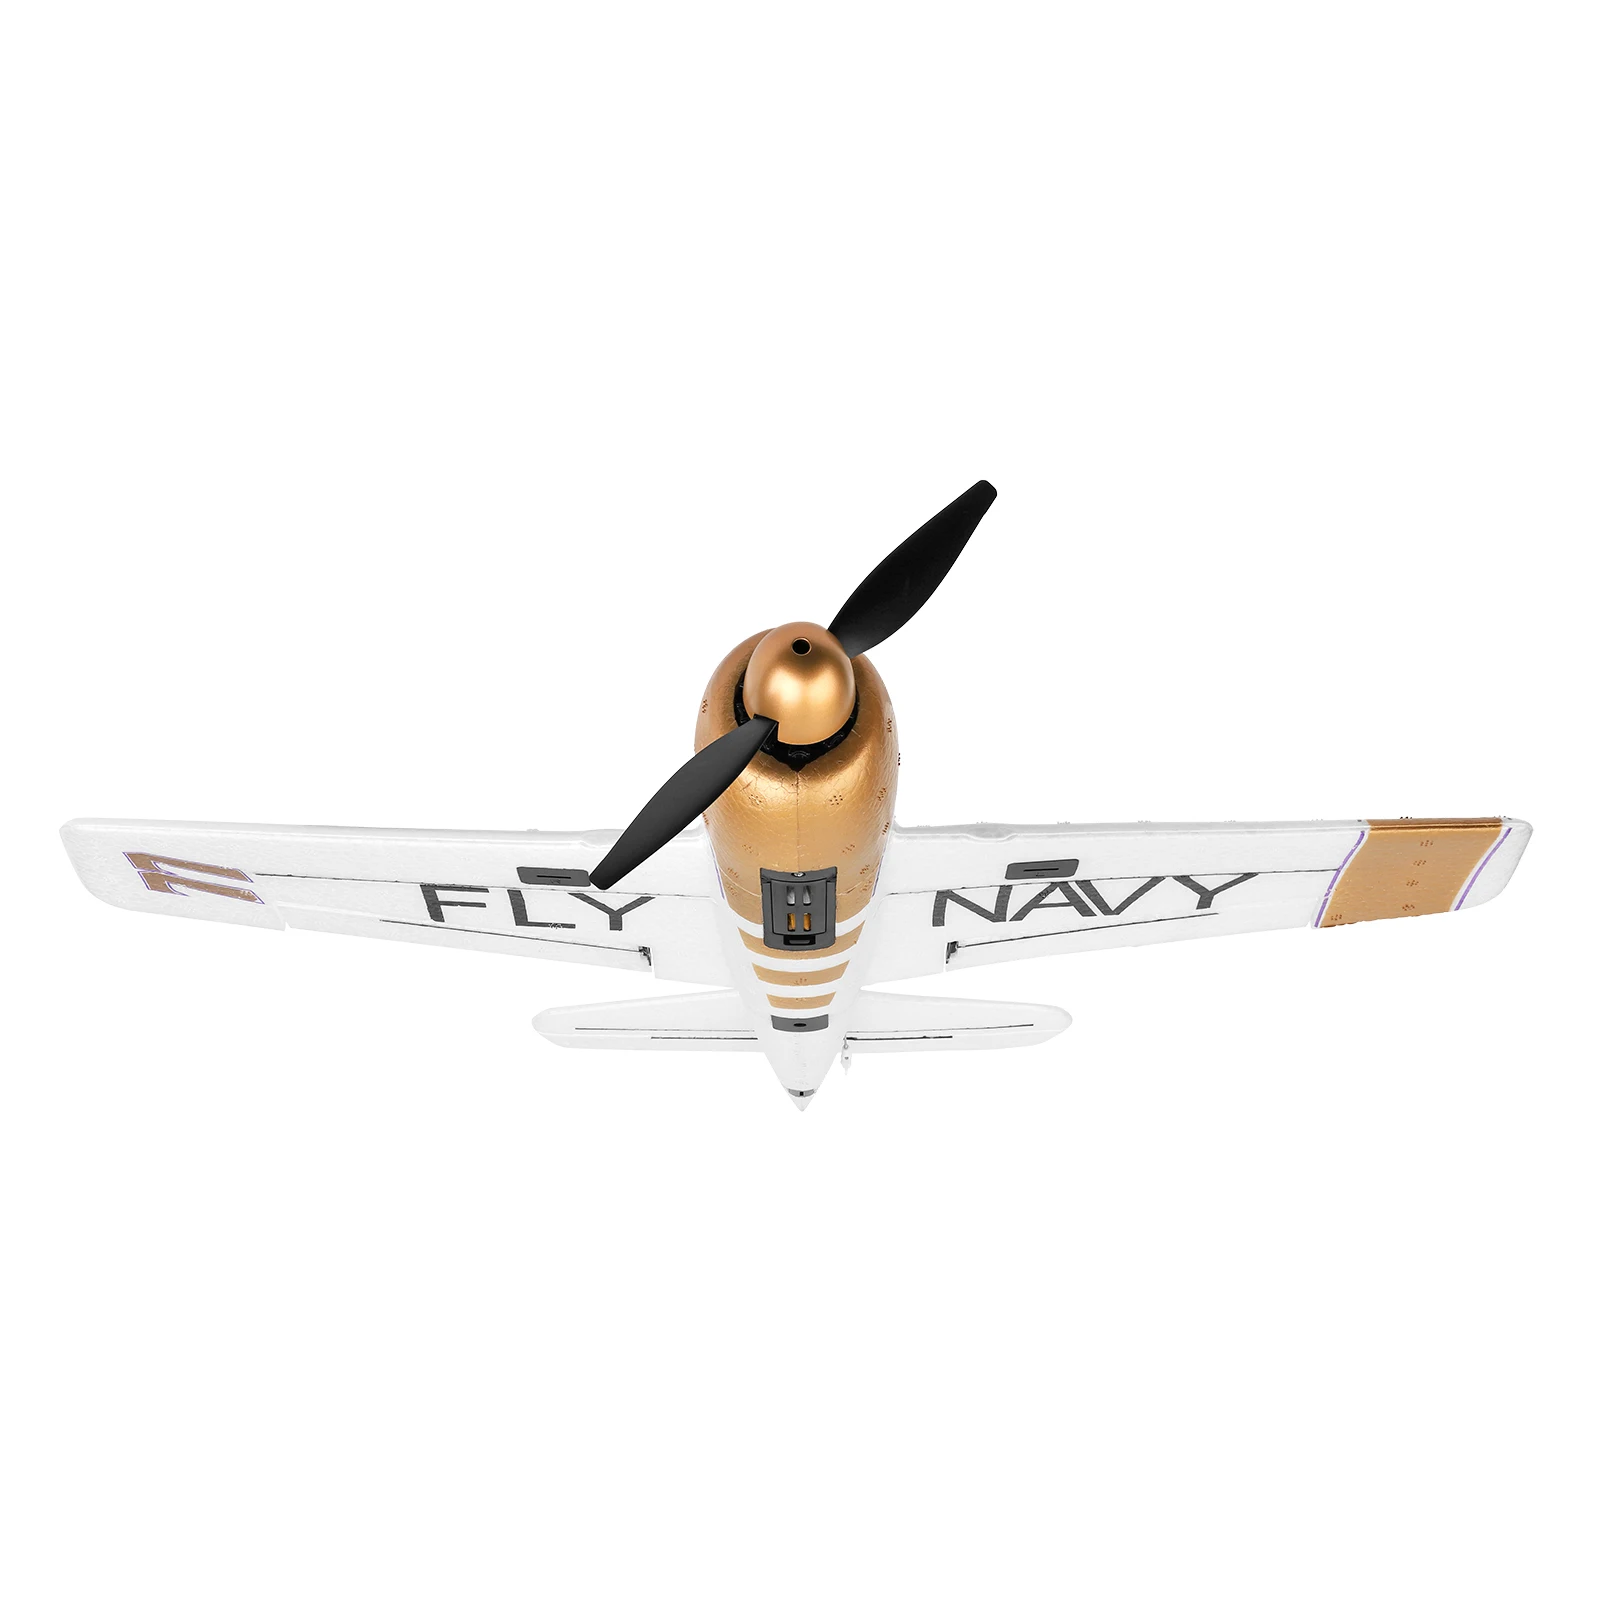 

HOSHI WLtoys A260 RC Airplane 2.4GHz 4CH 6 Axis Stability RC Airplane Foam Flight Toys 6G/3D Mode 384mm Wingspan Plane New, Golden